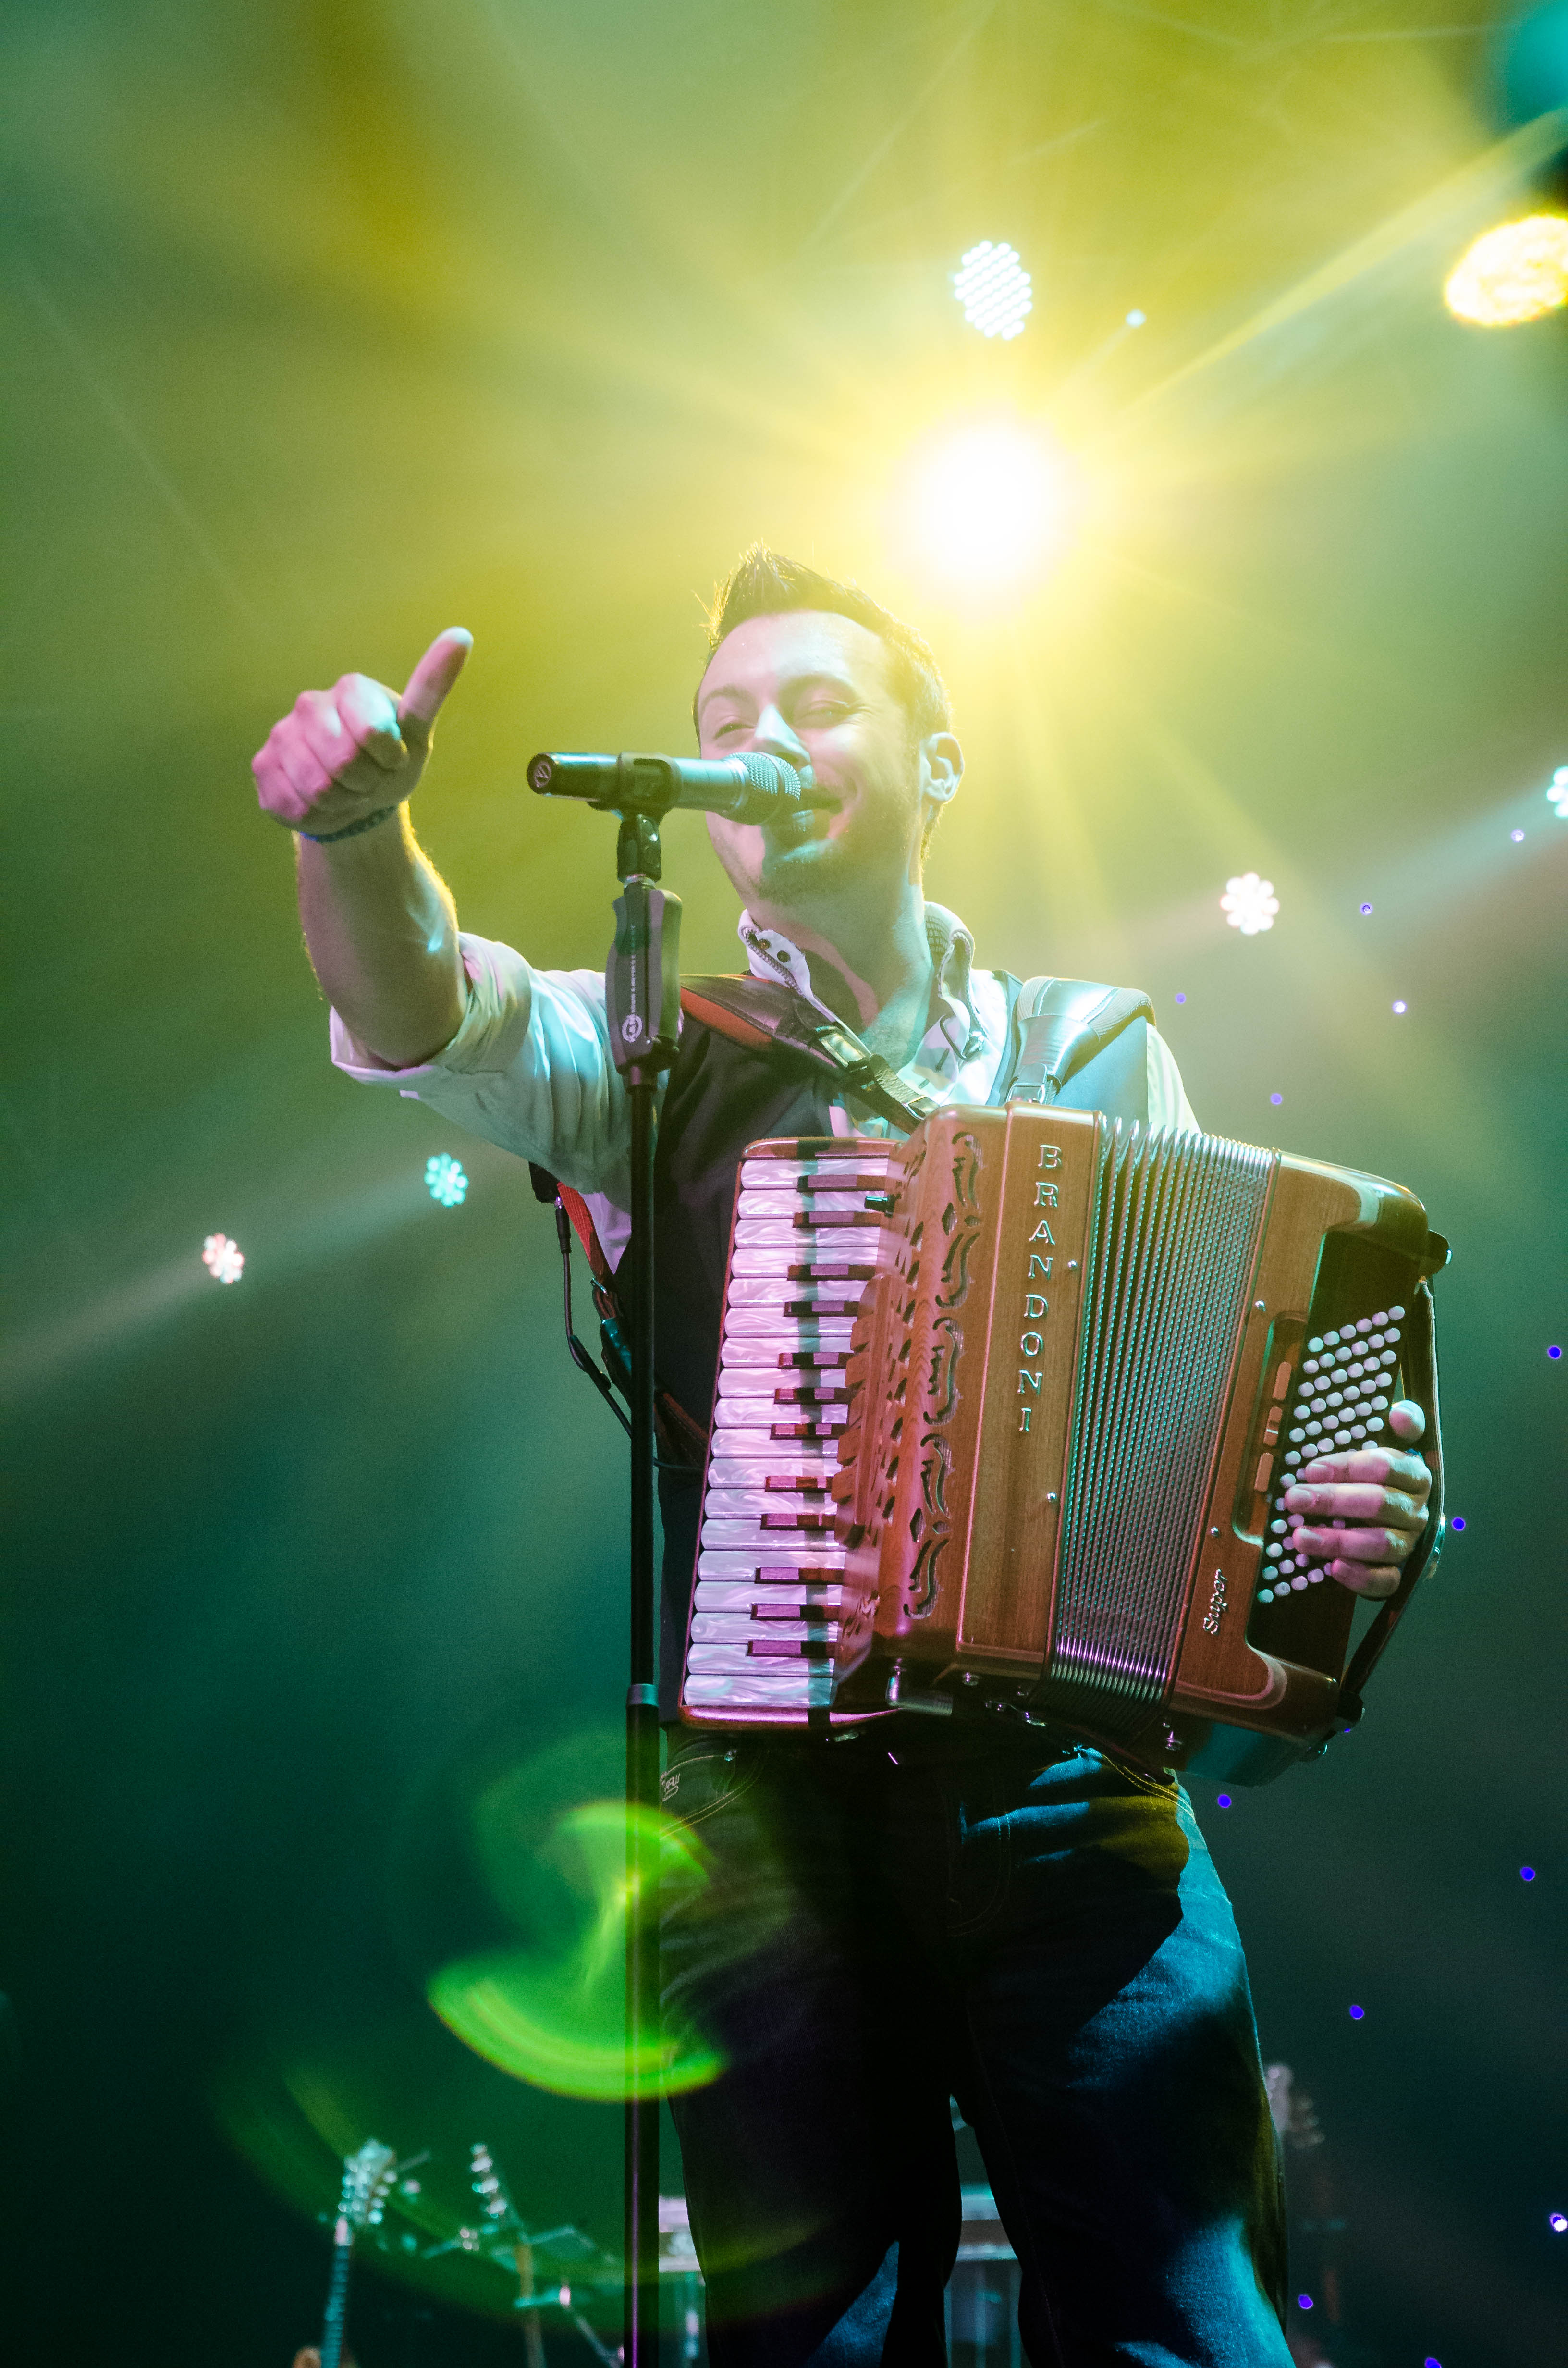 nathan-carter-at-the-marquee-cork-by-sean-smyth-15-6-14-32-of-55